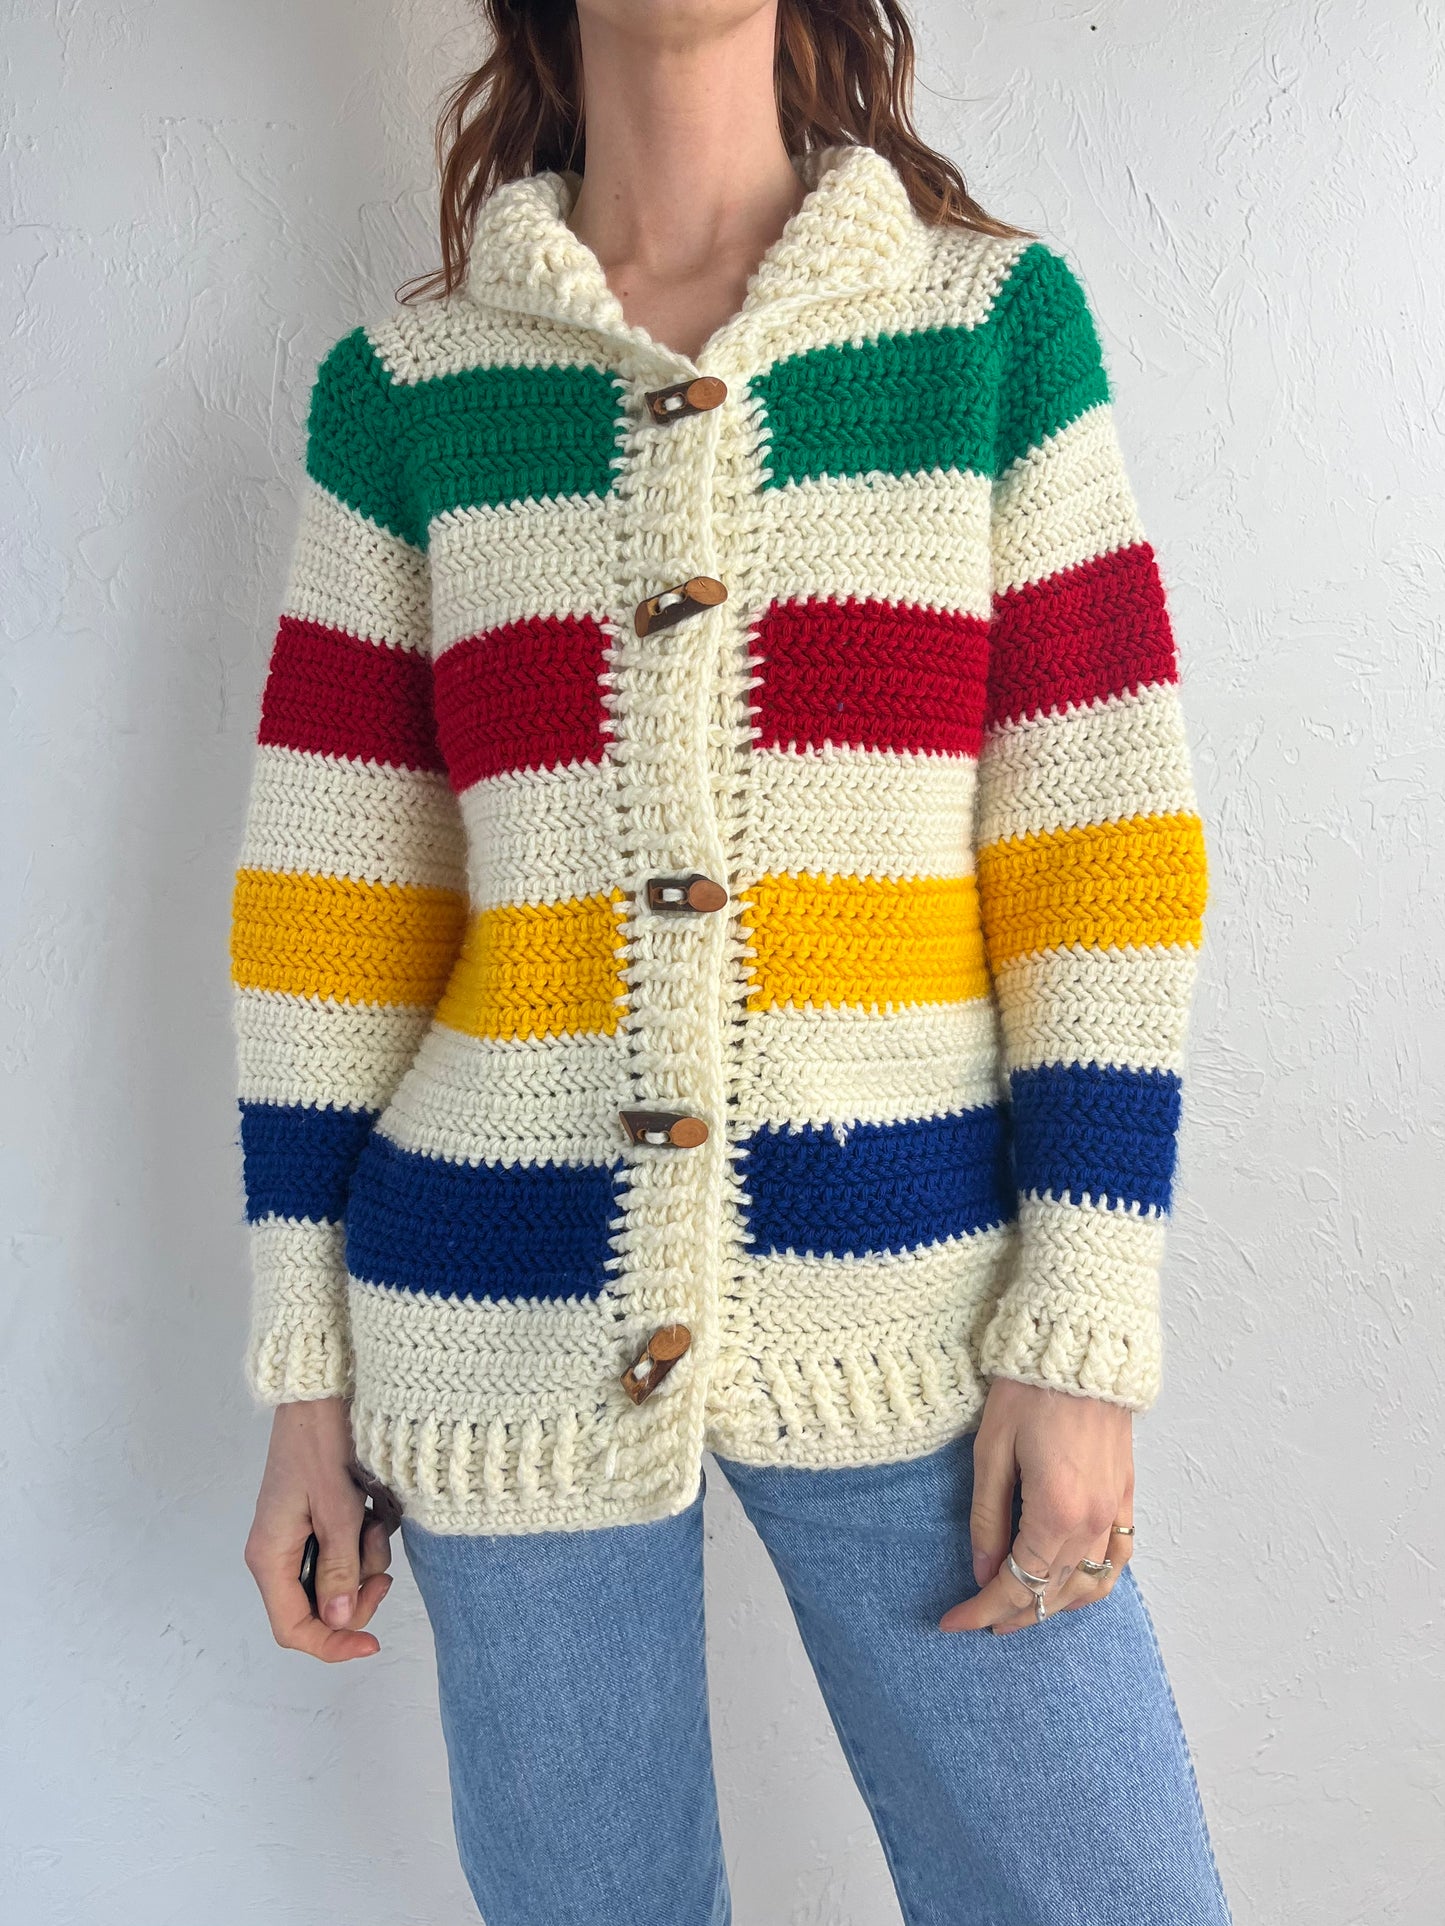 Vintage Hand Knit Striped Cardigan Sweater / Small